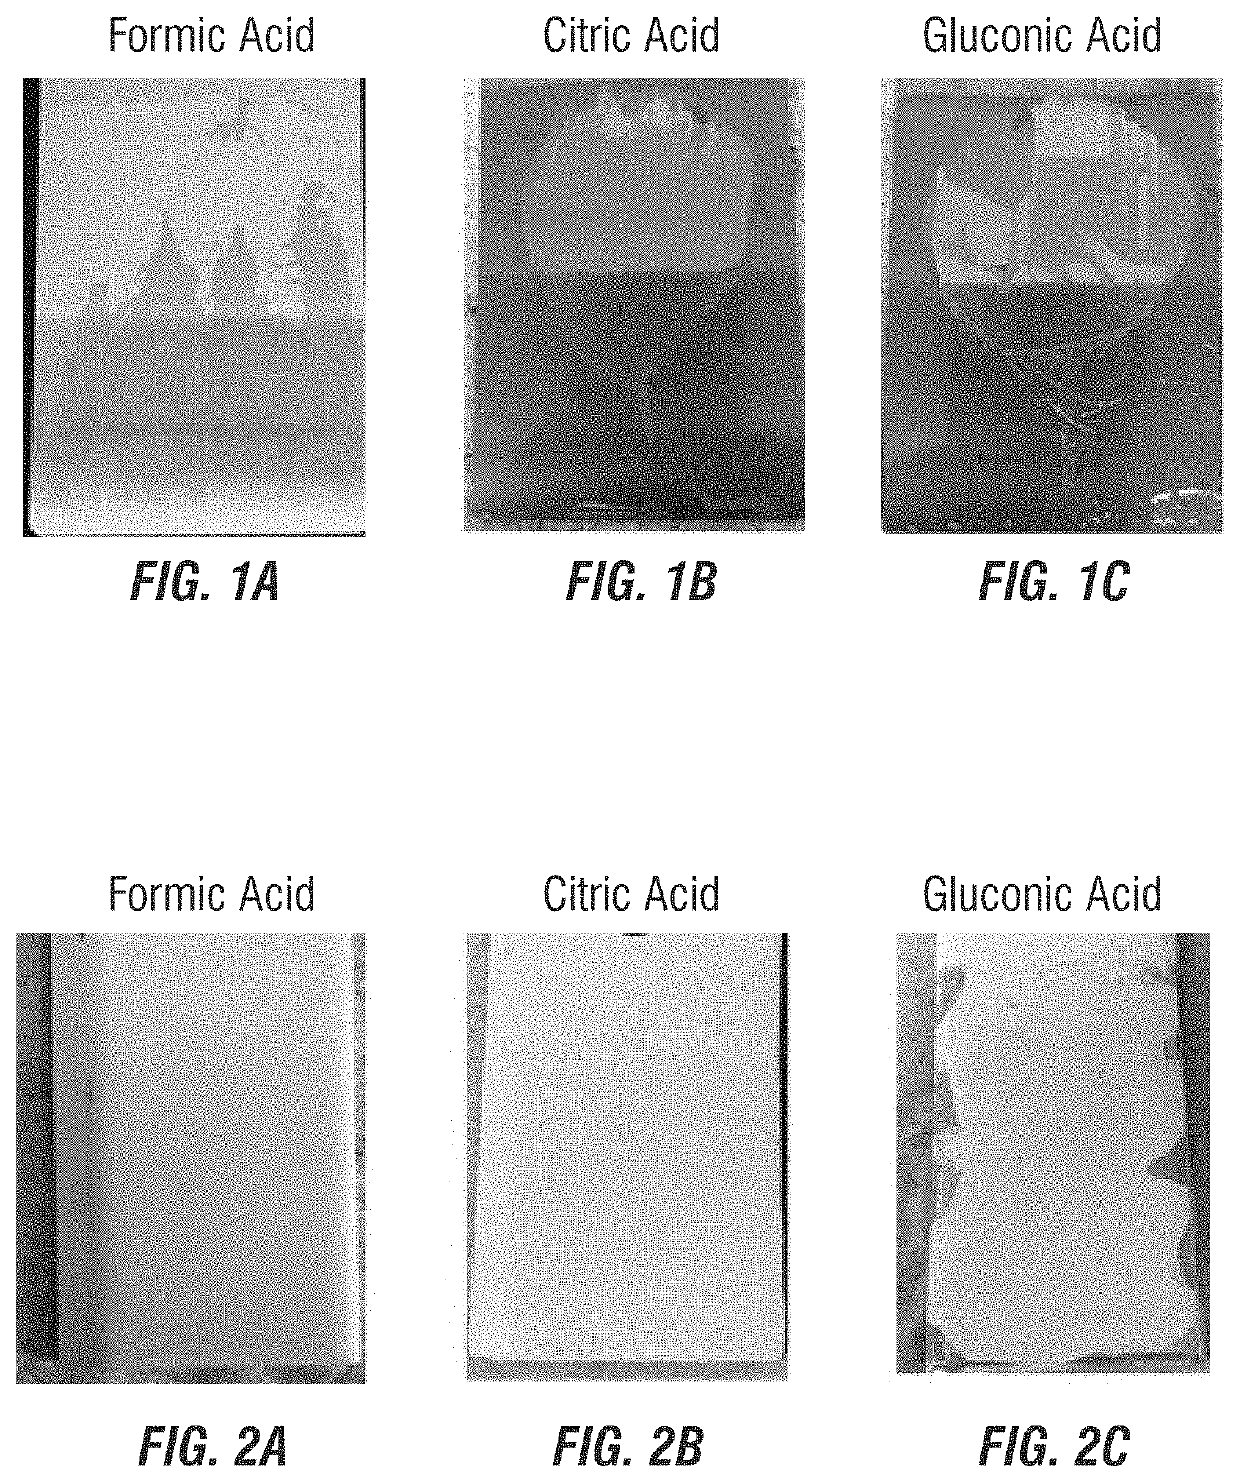 Multipurpose acidic compositions and methods of use